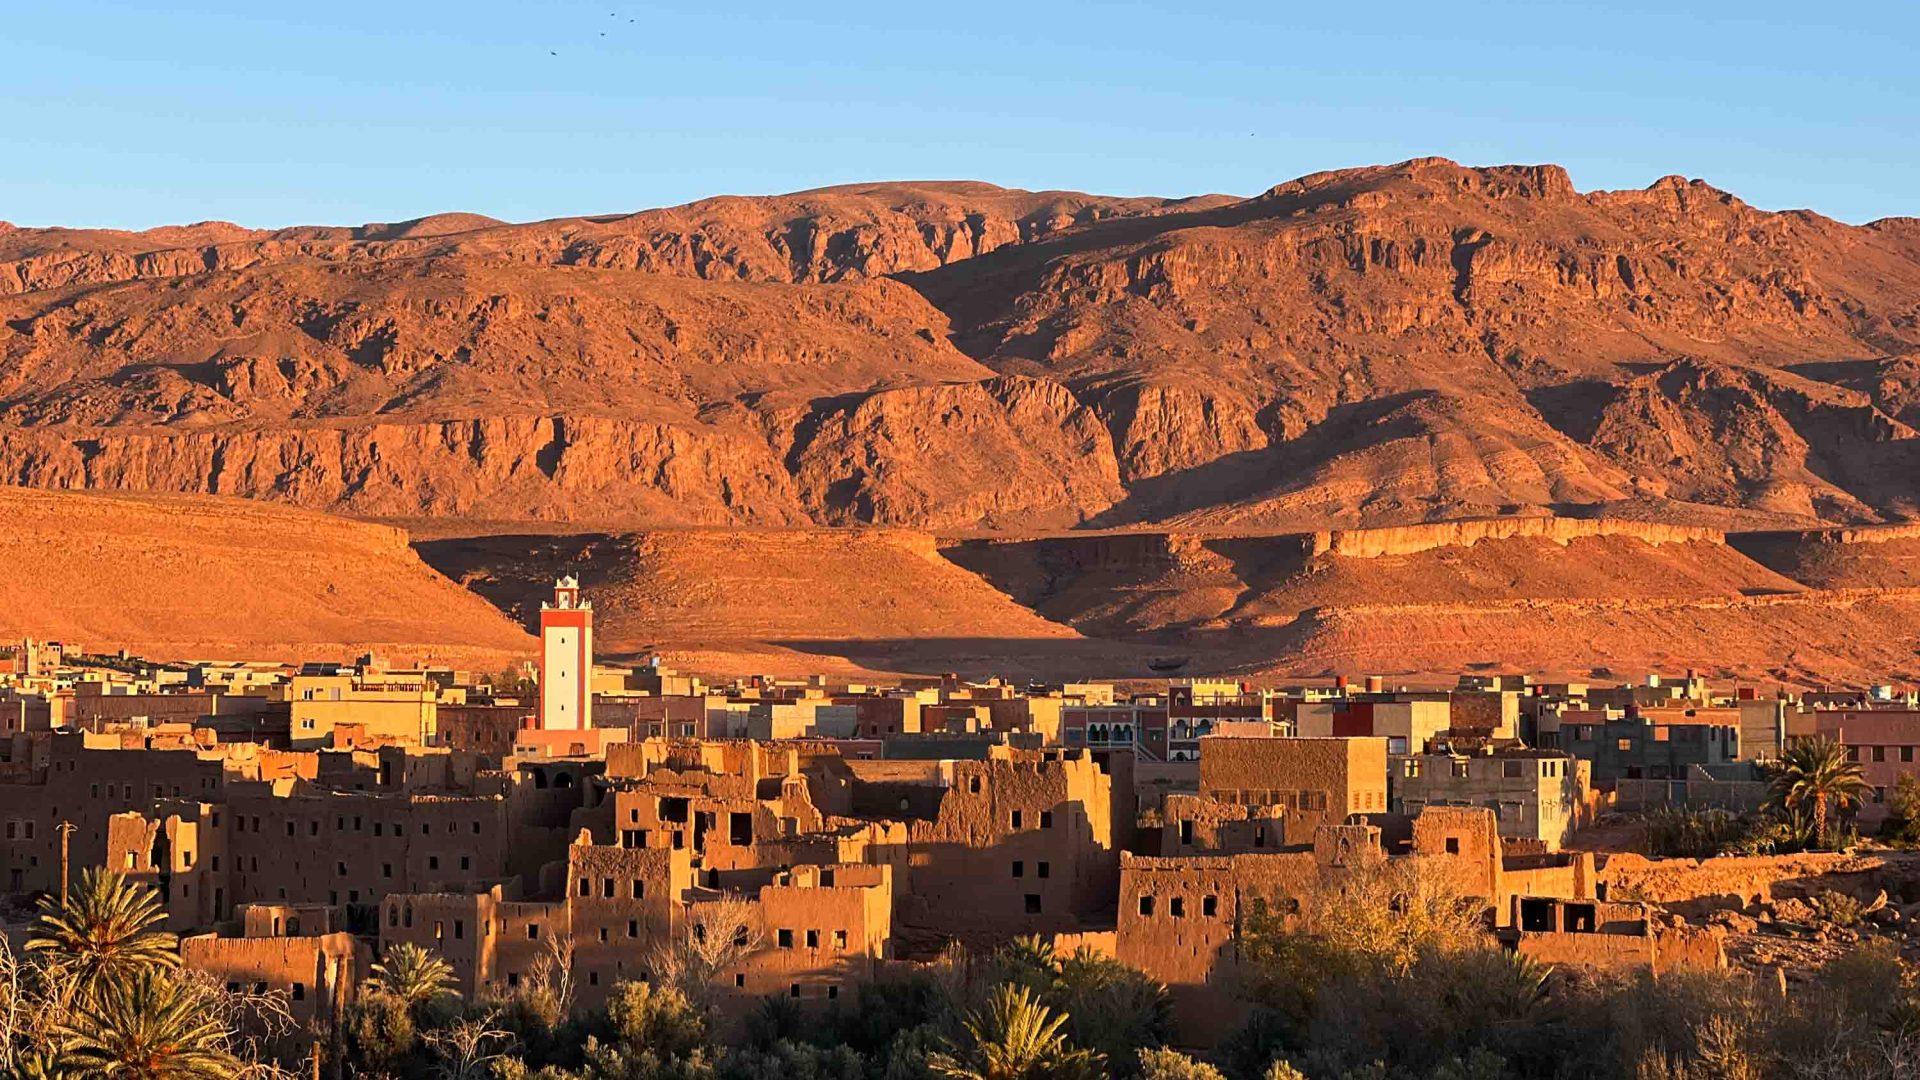 A traditional Moroccan desert town in the glow of sunset.